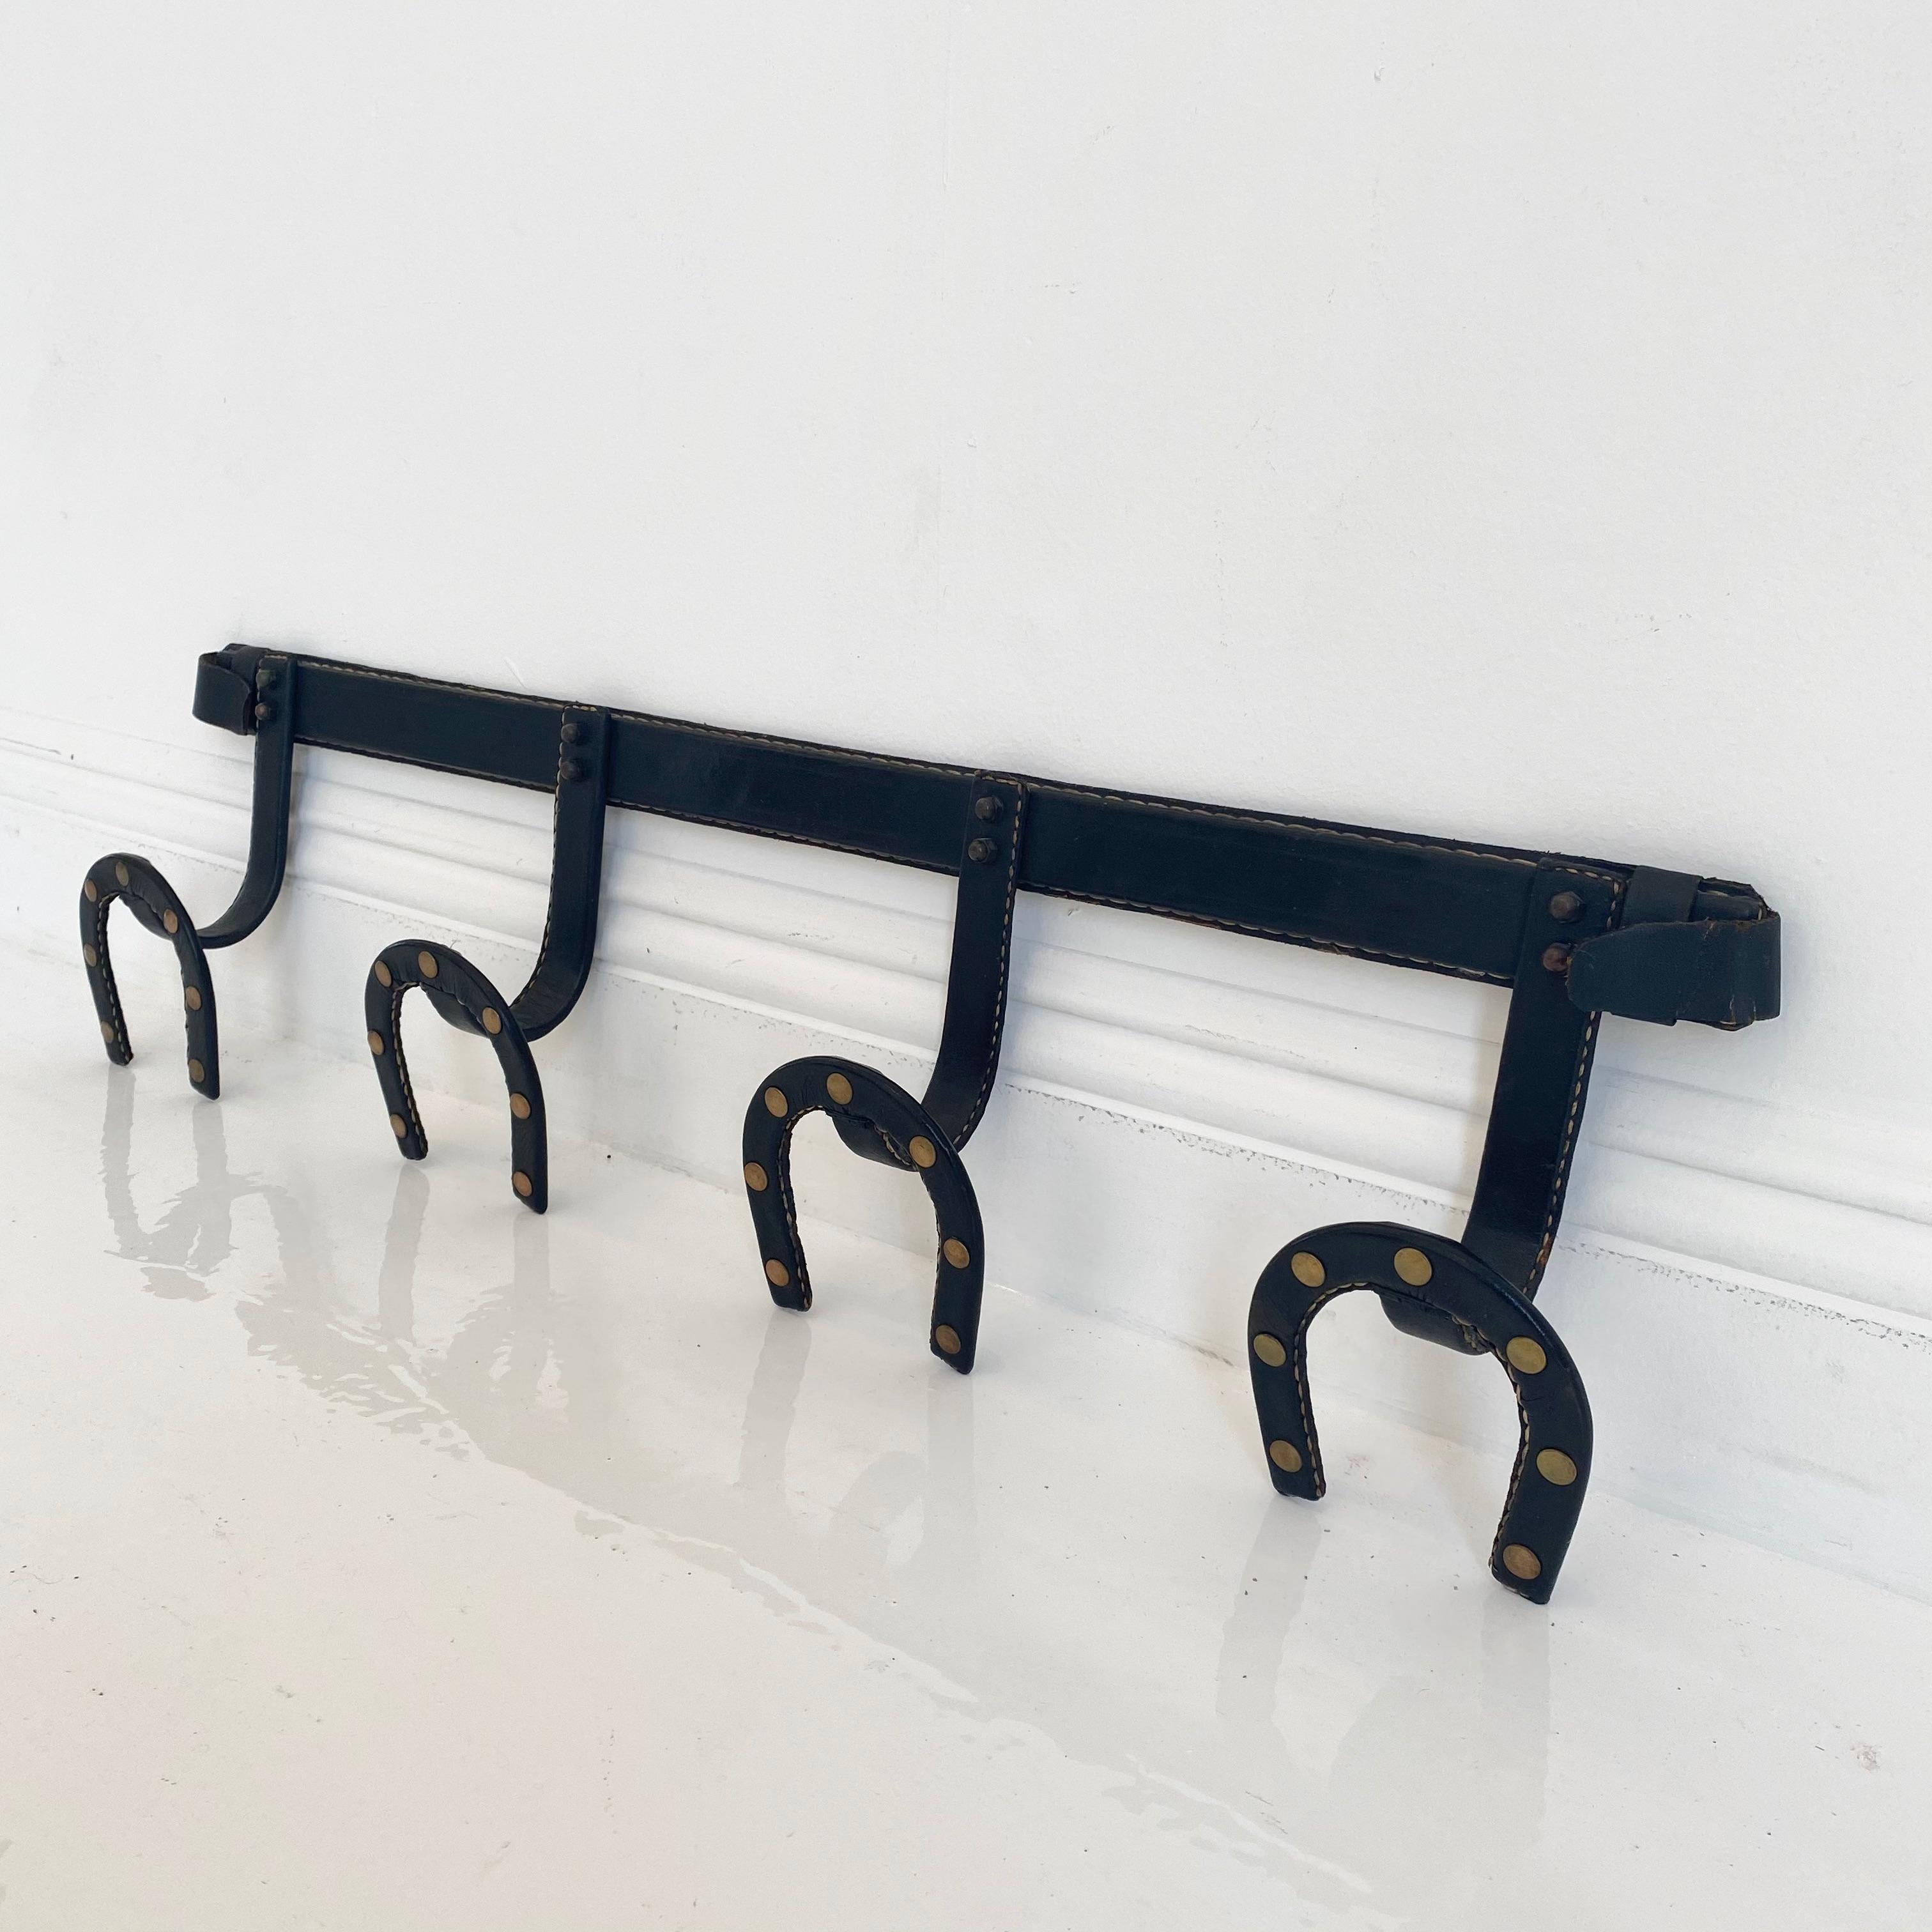 Handsome leather horse shoe coat rack by French designer Jacques Adnet. Good vintage condition. Iron frame completely wrapped in black saddle leather. 4 horseshoe shaped hooks with brass detailing. Fantastic piece of collectible Adnet.